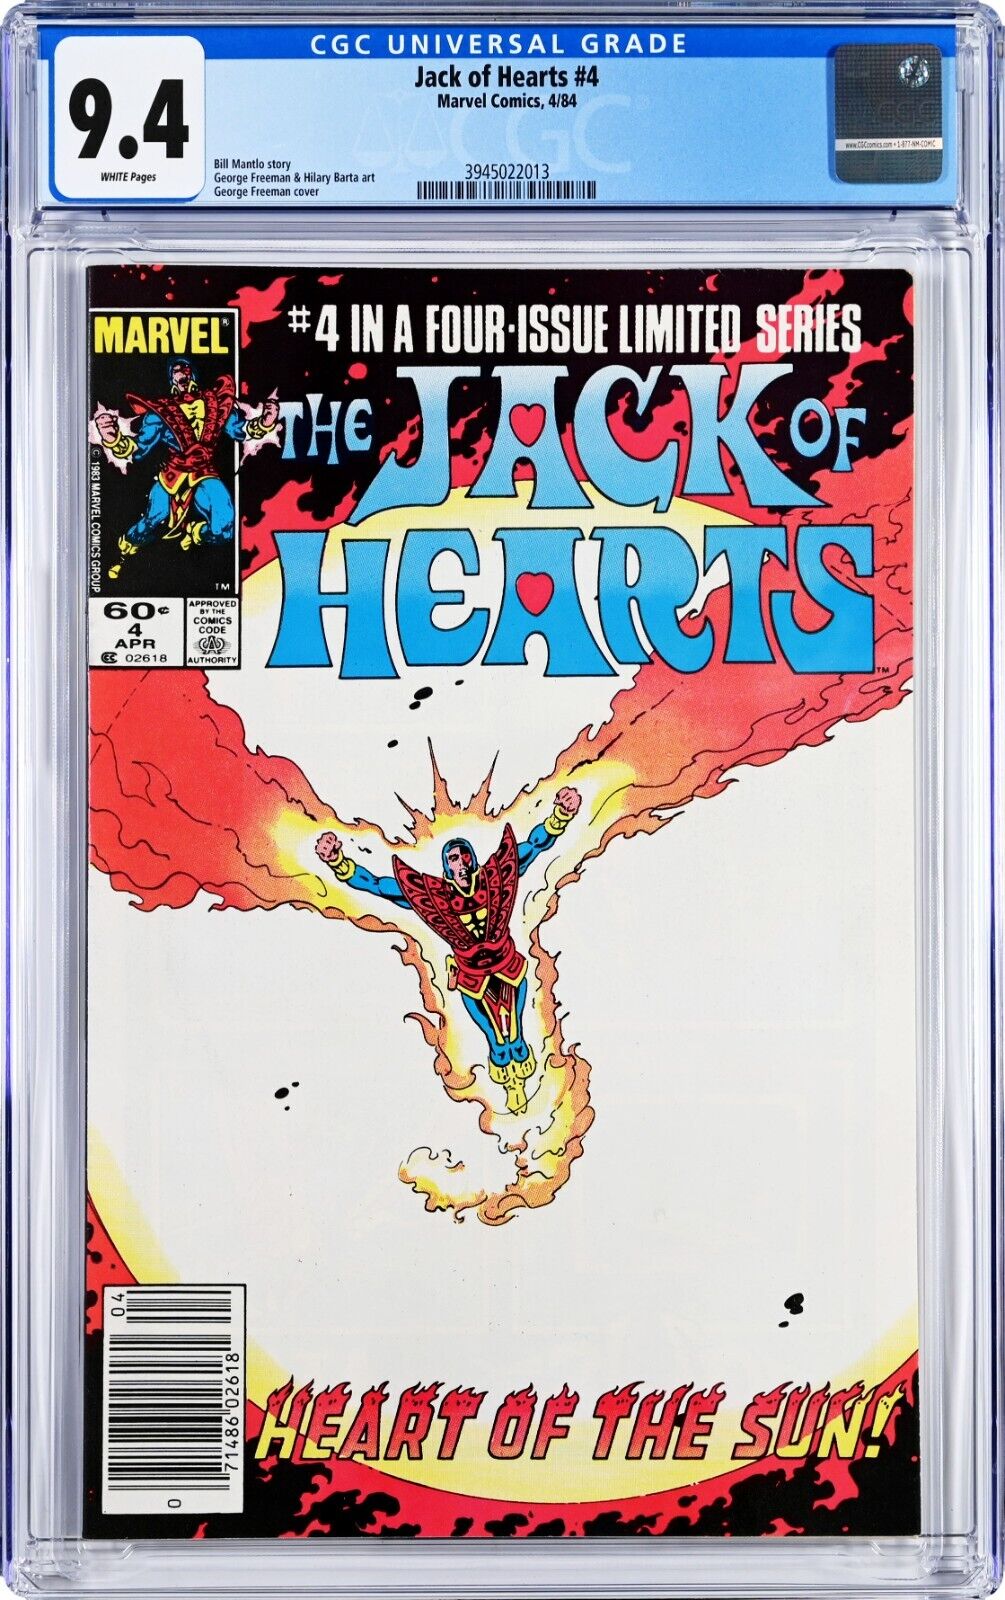 Jack of Hearts #4 CGC 9.4 (Apr 1984, Marvel) Limited Series, Bill Mantlo story